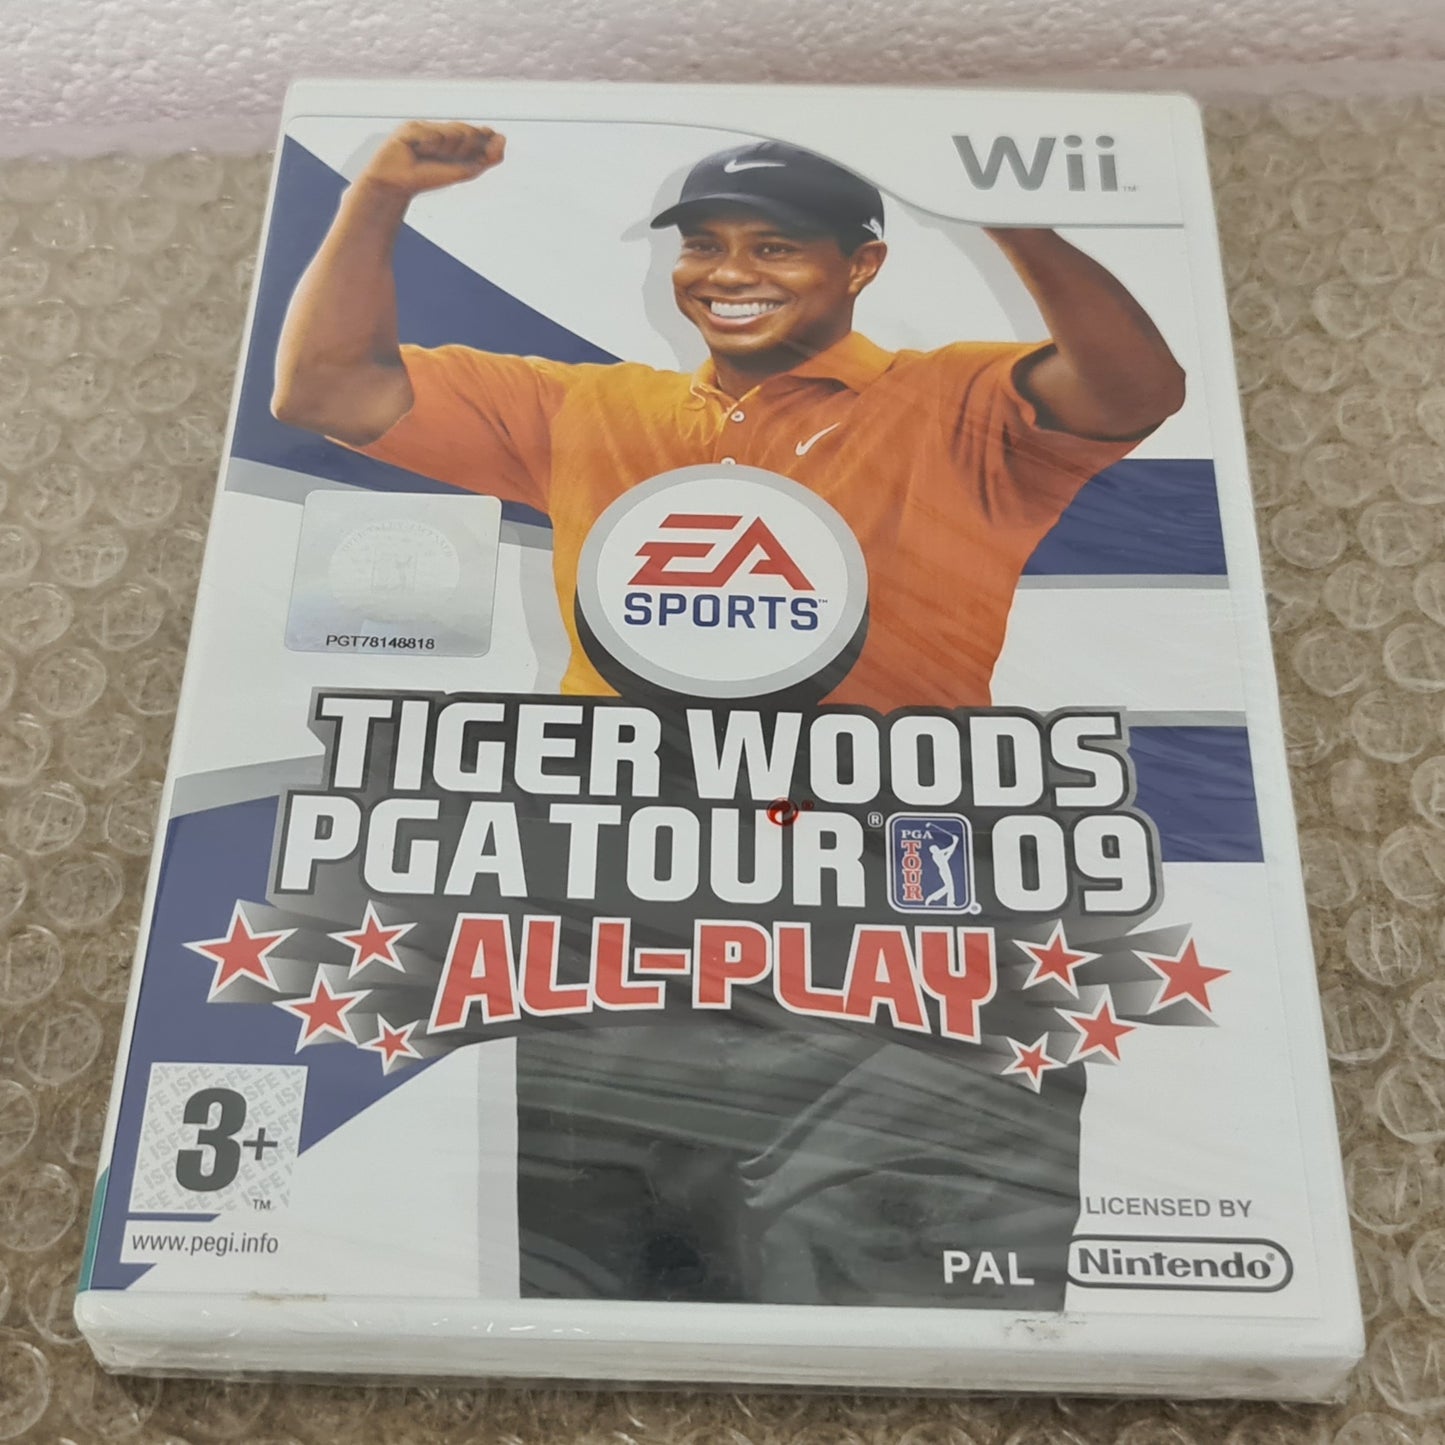 Brand New and Sealed Tiger Woods PGA Tour 09 All-Play Nintendo Wii Game